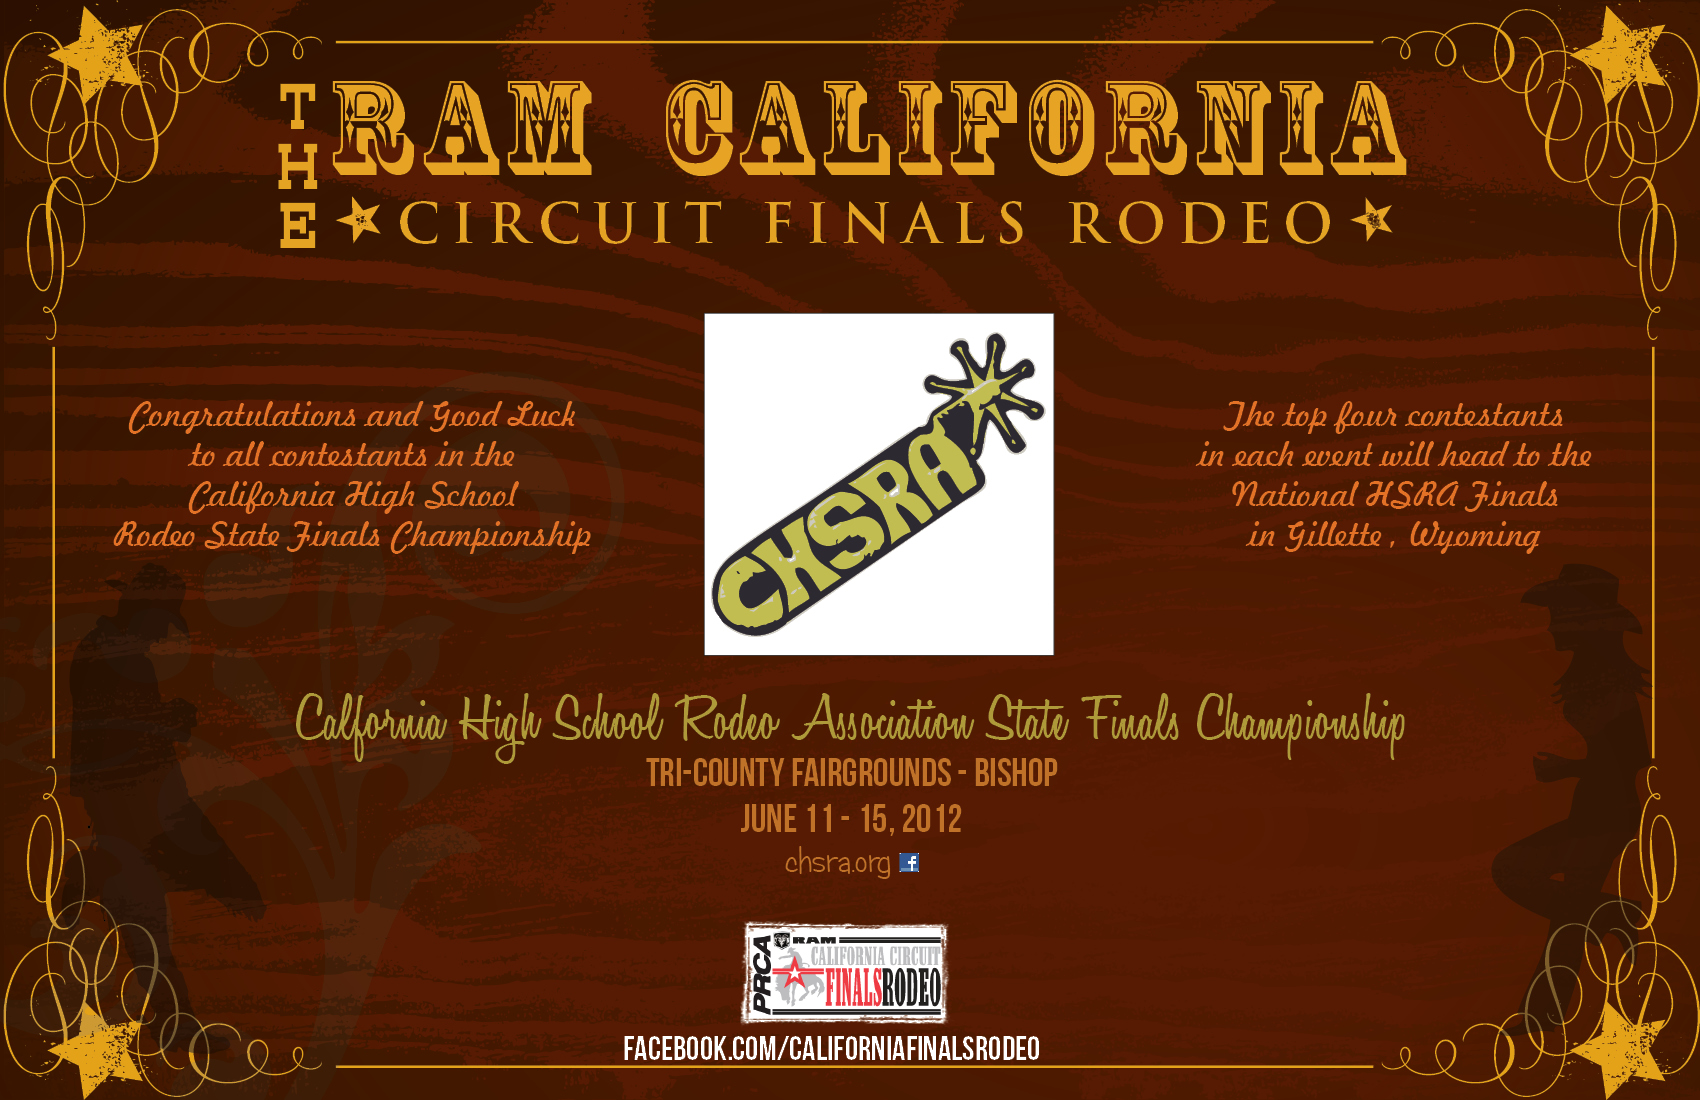 California High School Rodeo Assocation State Final Championships